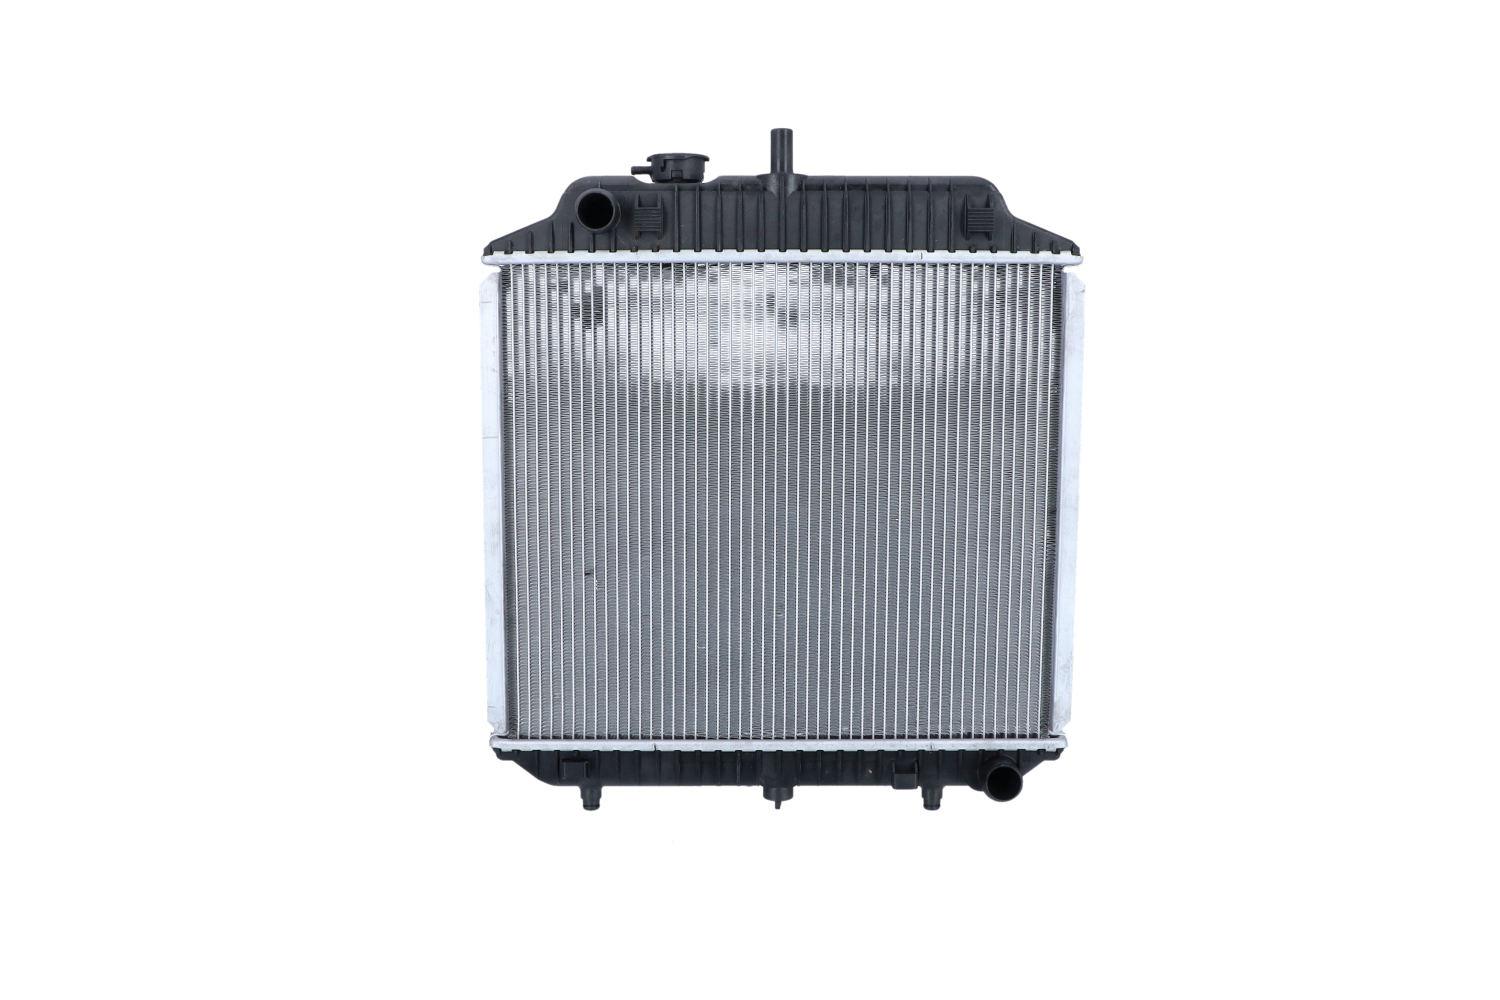 NRF 504271 Engine radiator Aluminium, 485 x 417 x 34 mm, with mounting parts, Brazed cooling fins